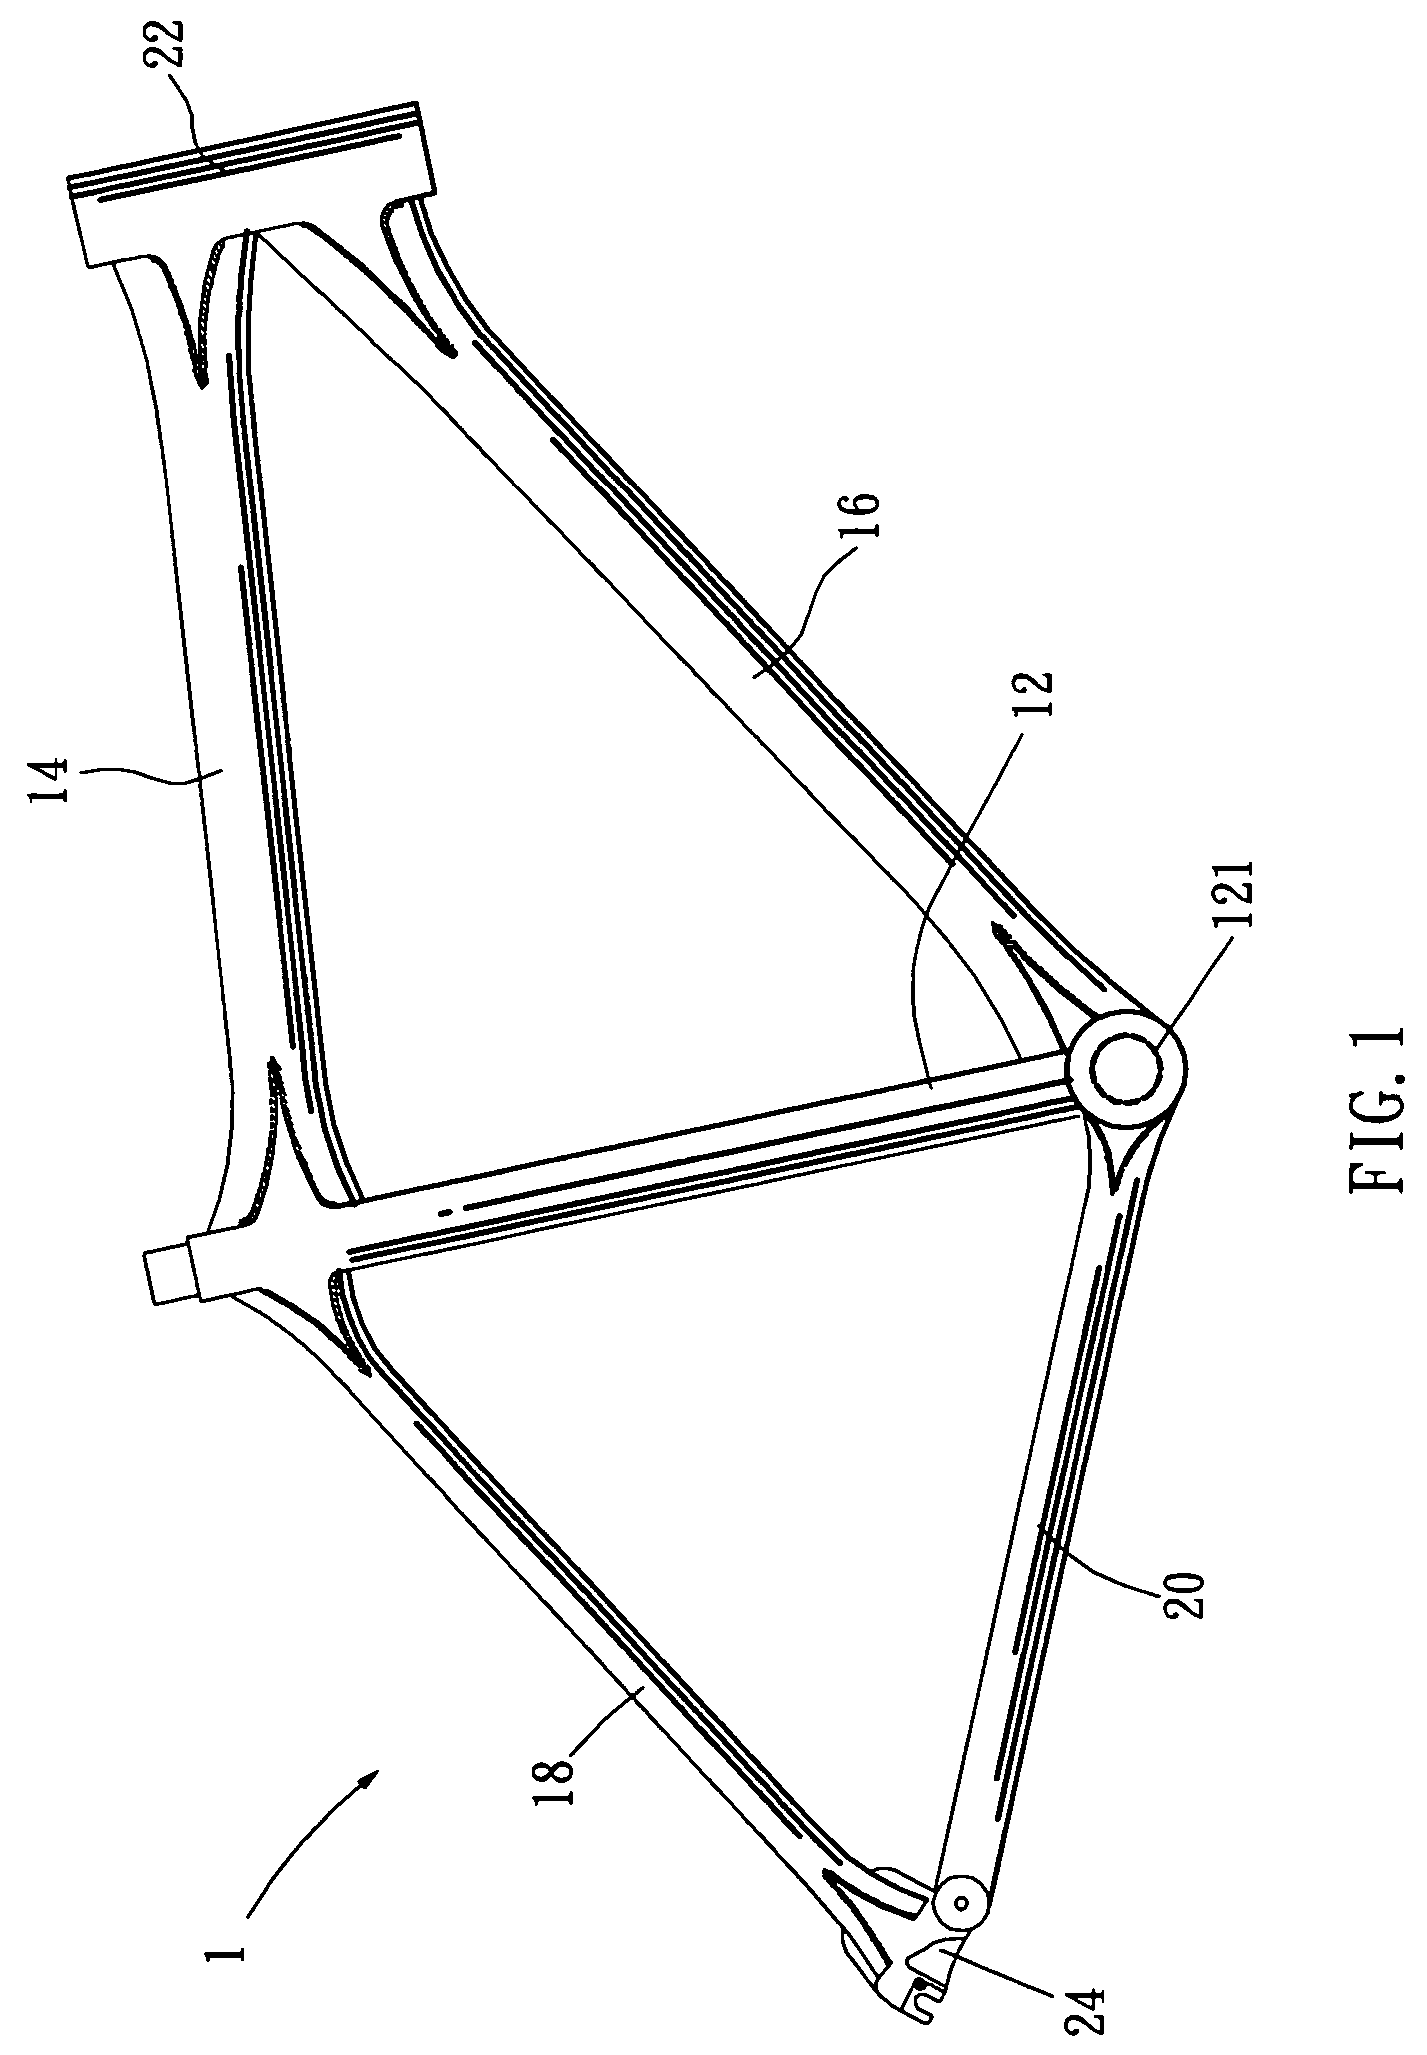 Tube connection assembly of bicycle frame